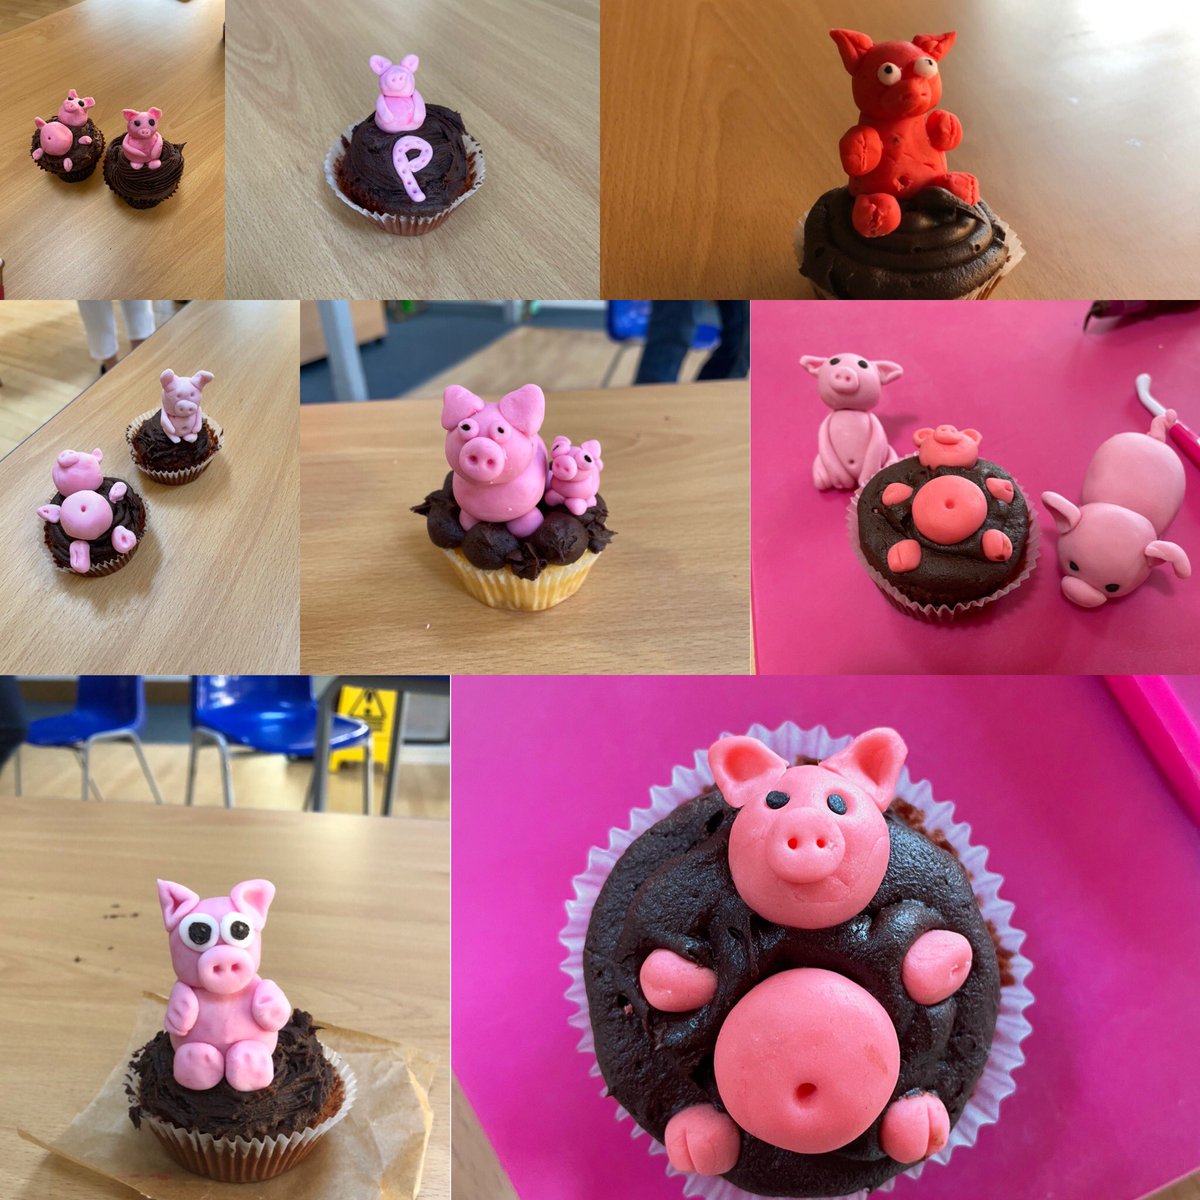 After a busy day of meetings and planning yesterday, the Lower School staff enjoyed a team building morning of making cake decorations 🐷 #TeamBuilding #CakeDecorations #ThorngroveFamily